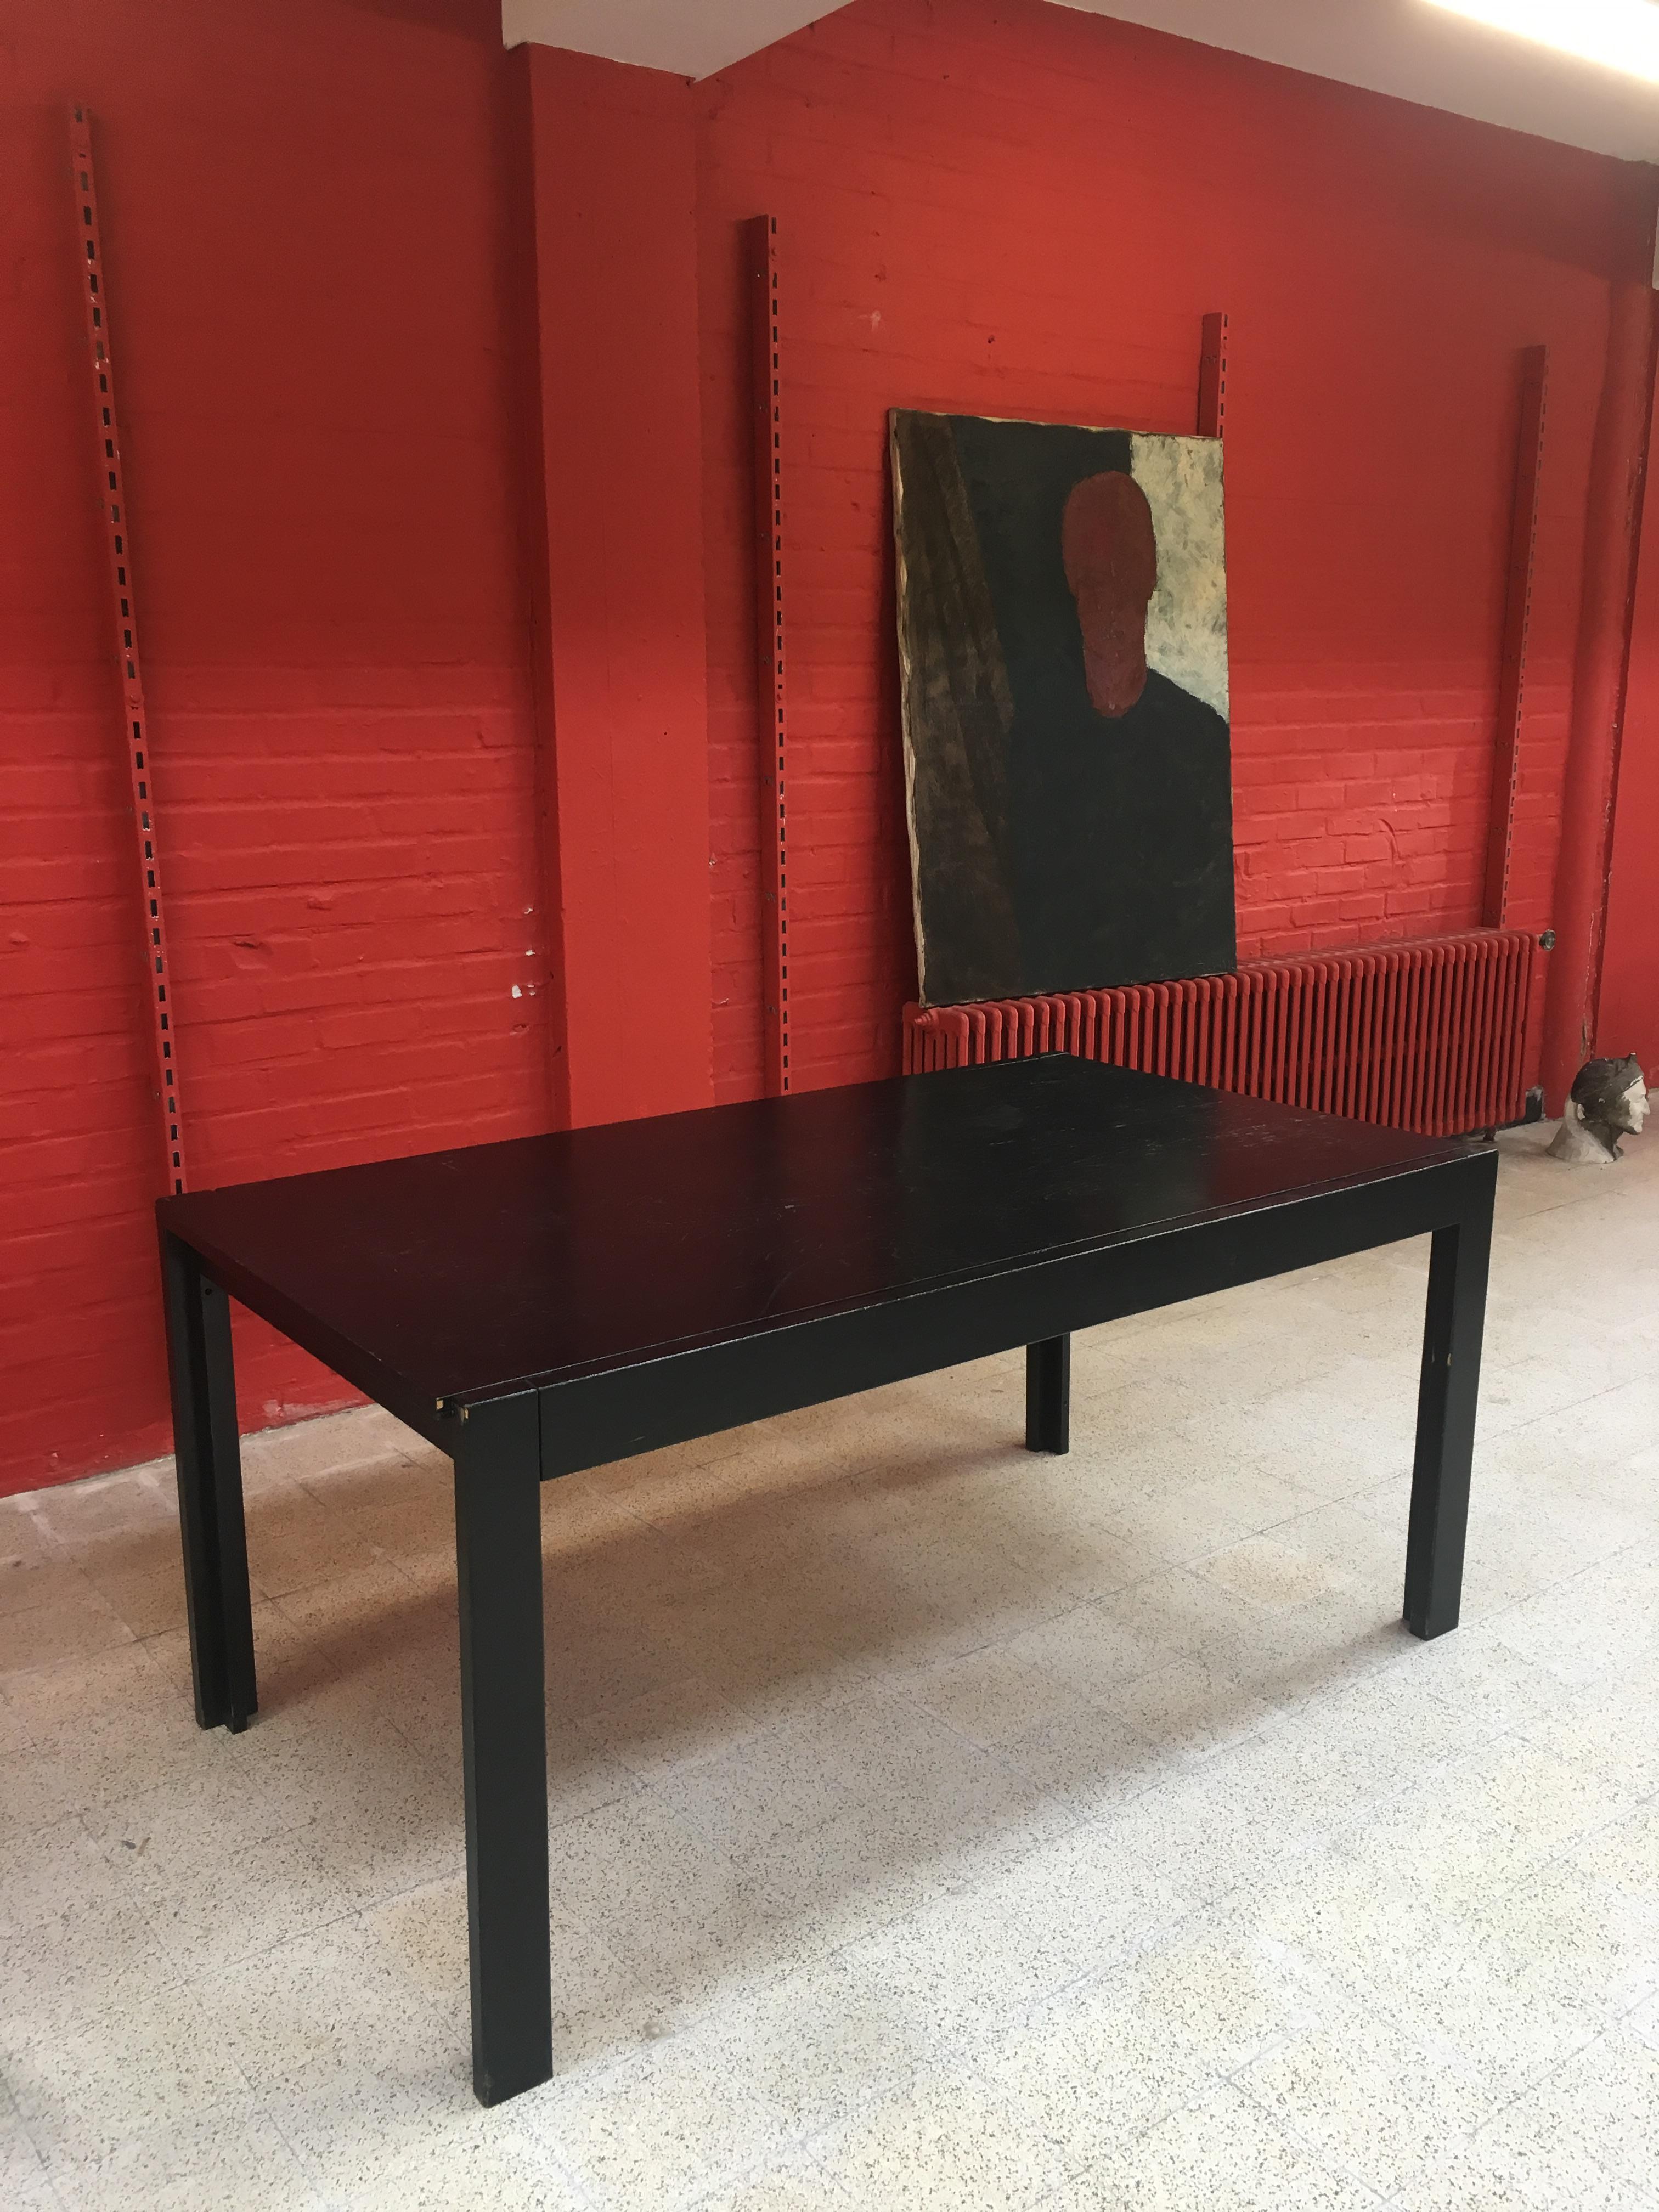 Brutalist table in blackened wood, circa 1960-1970
good condition, patina to redo
Dimension: 76 x 162 x 91 cm
with extension 76 x 262 x 91 cm
6 chairs and 1 large sideboard are also available.